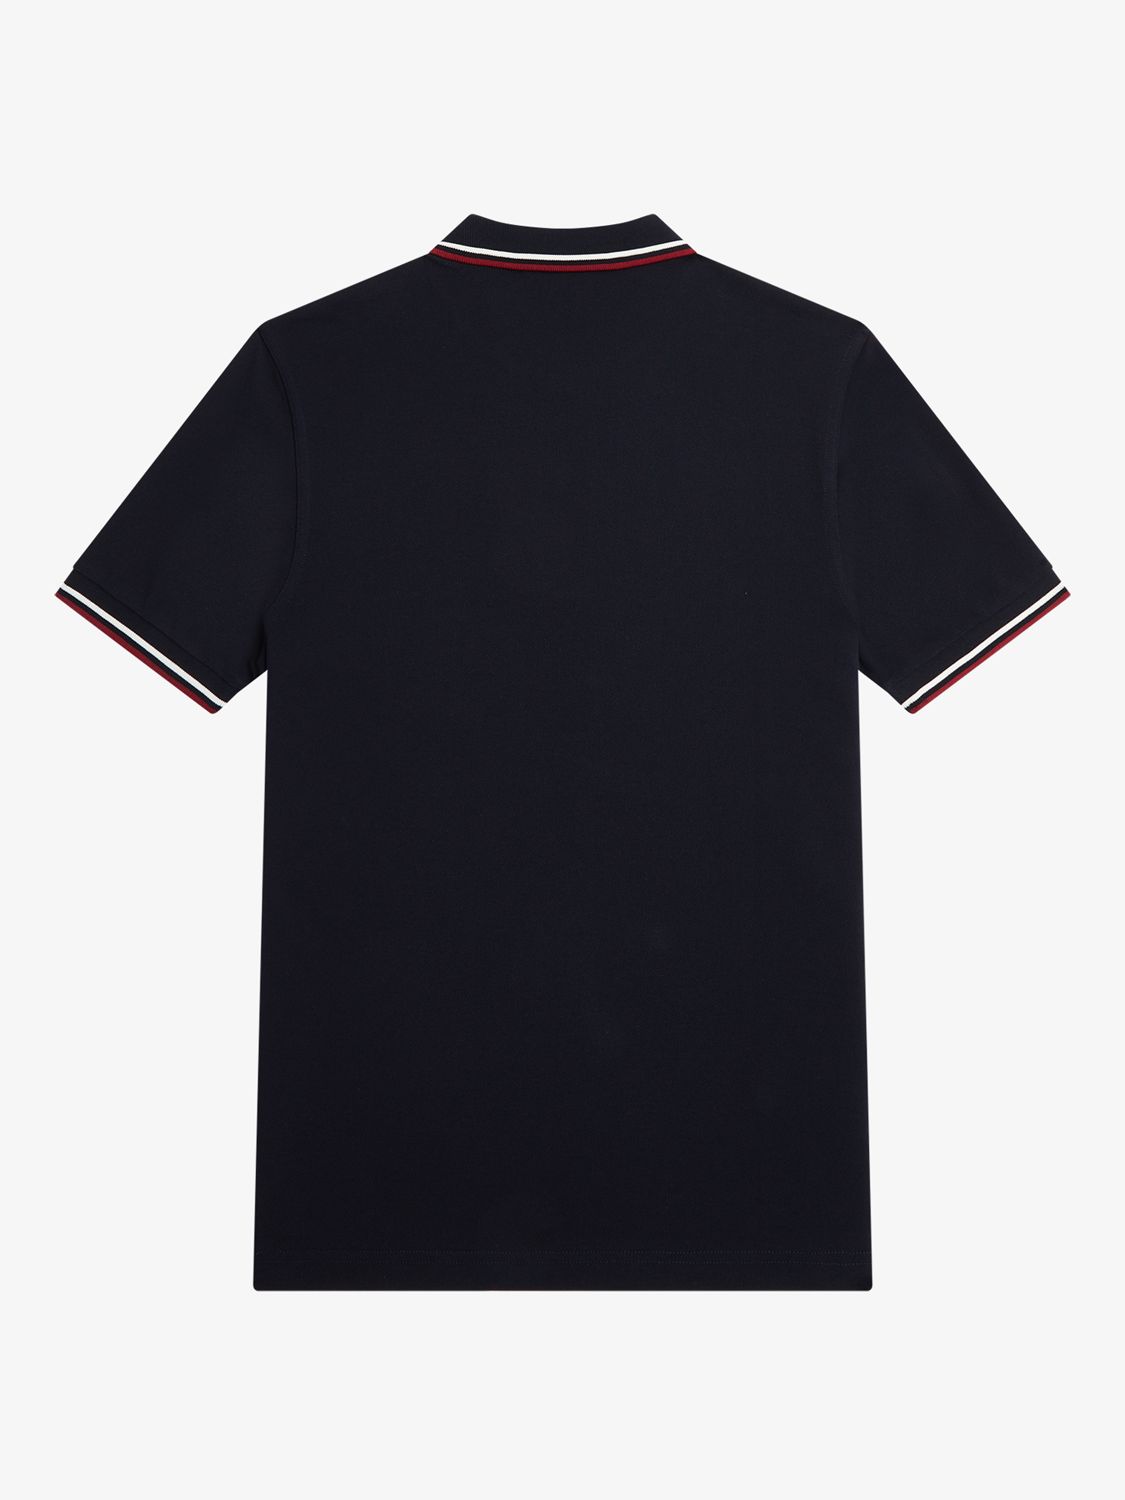 Fred Perry Short Sleeve Polo Shirt, Navy/White/Red, M